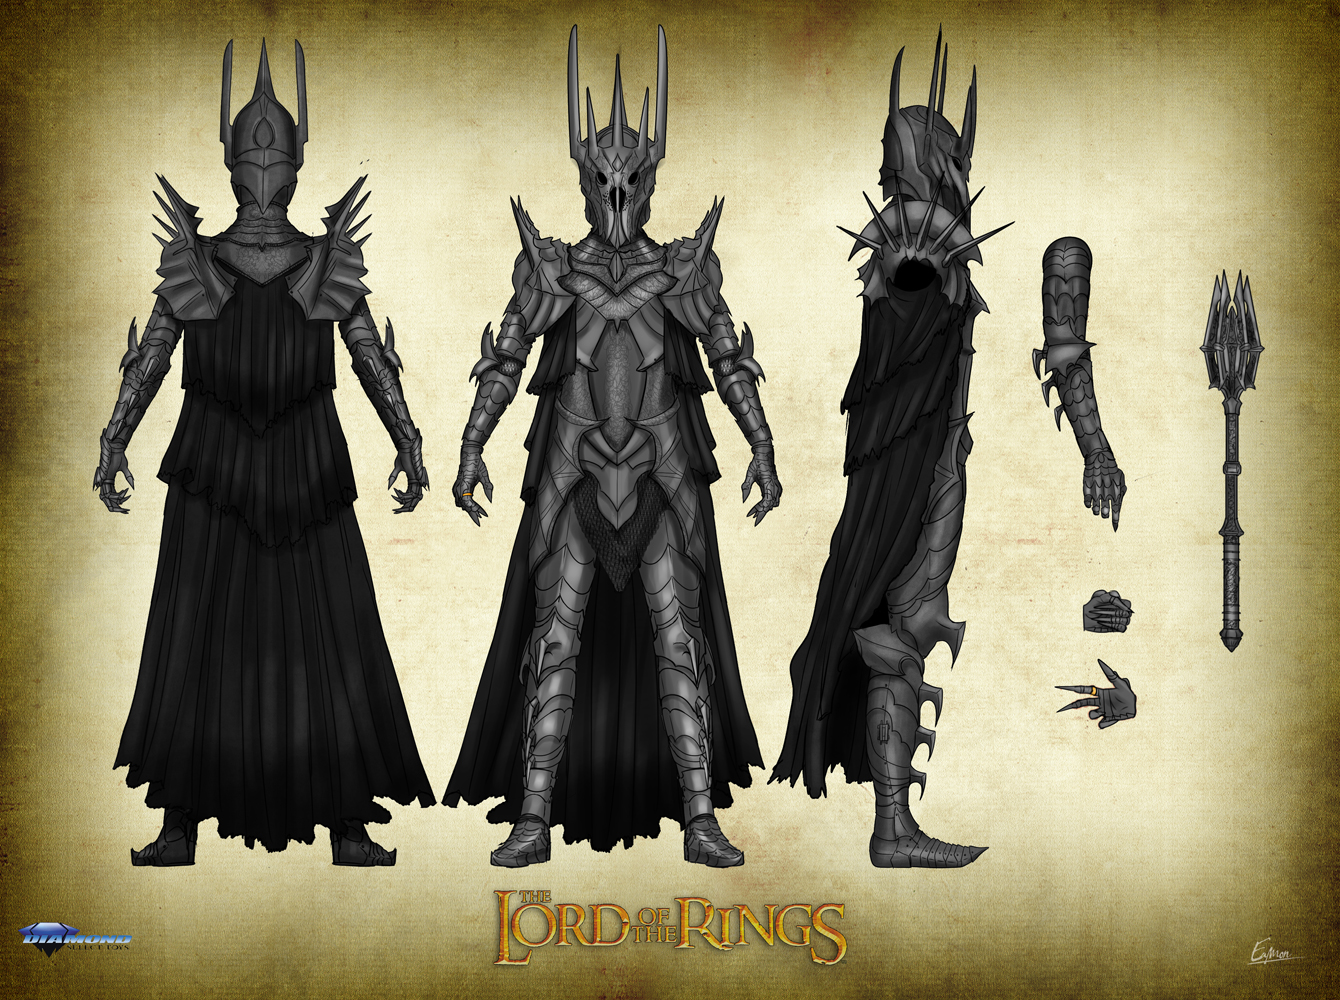 The Making Of: The Lord of Rings Diamond Select Toys